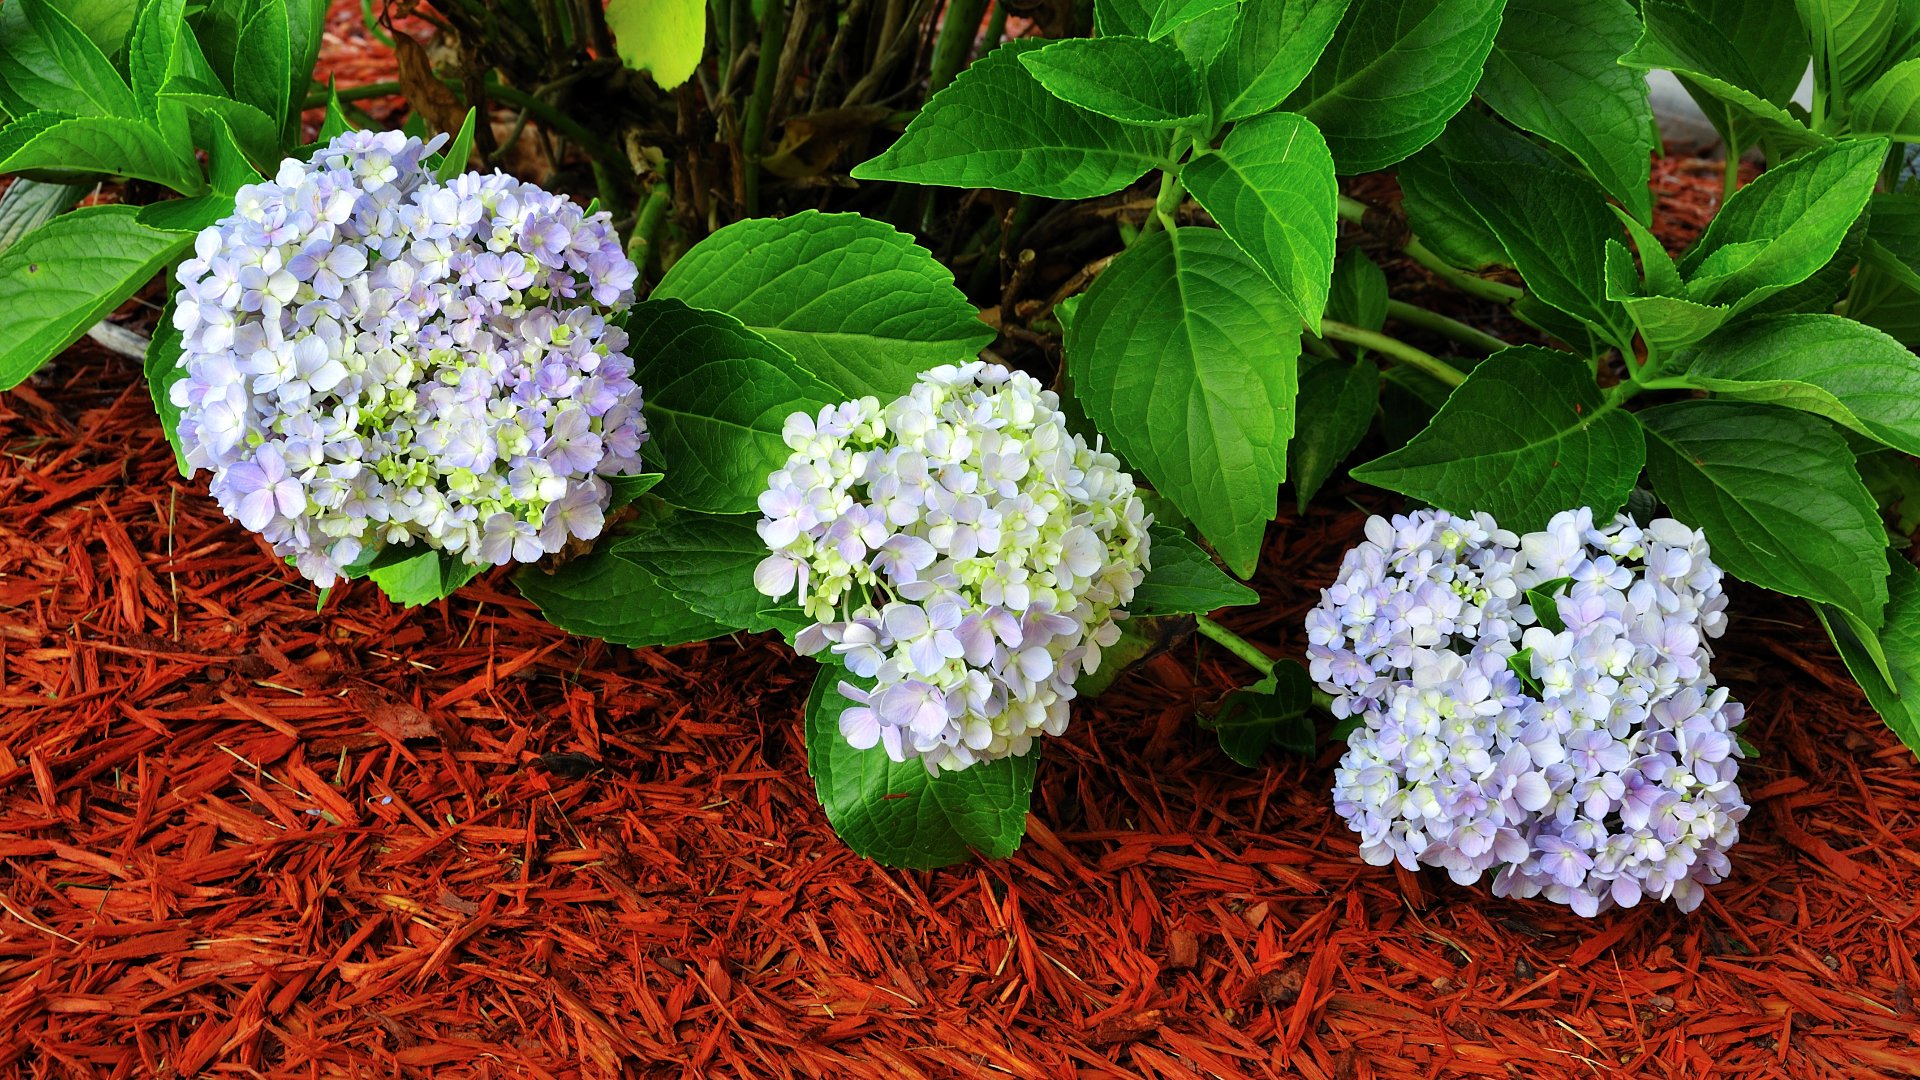 Give Your Plants the Protection They Need by Refreshing Your Mulch Every Spring